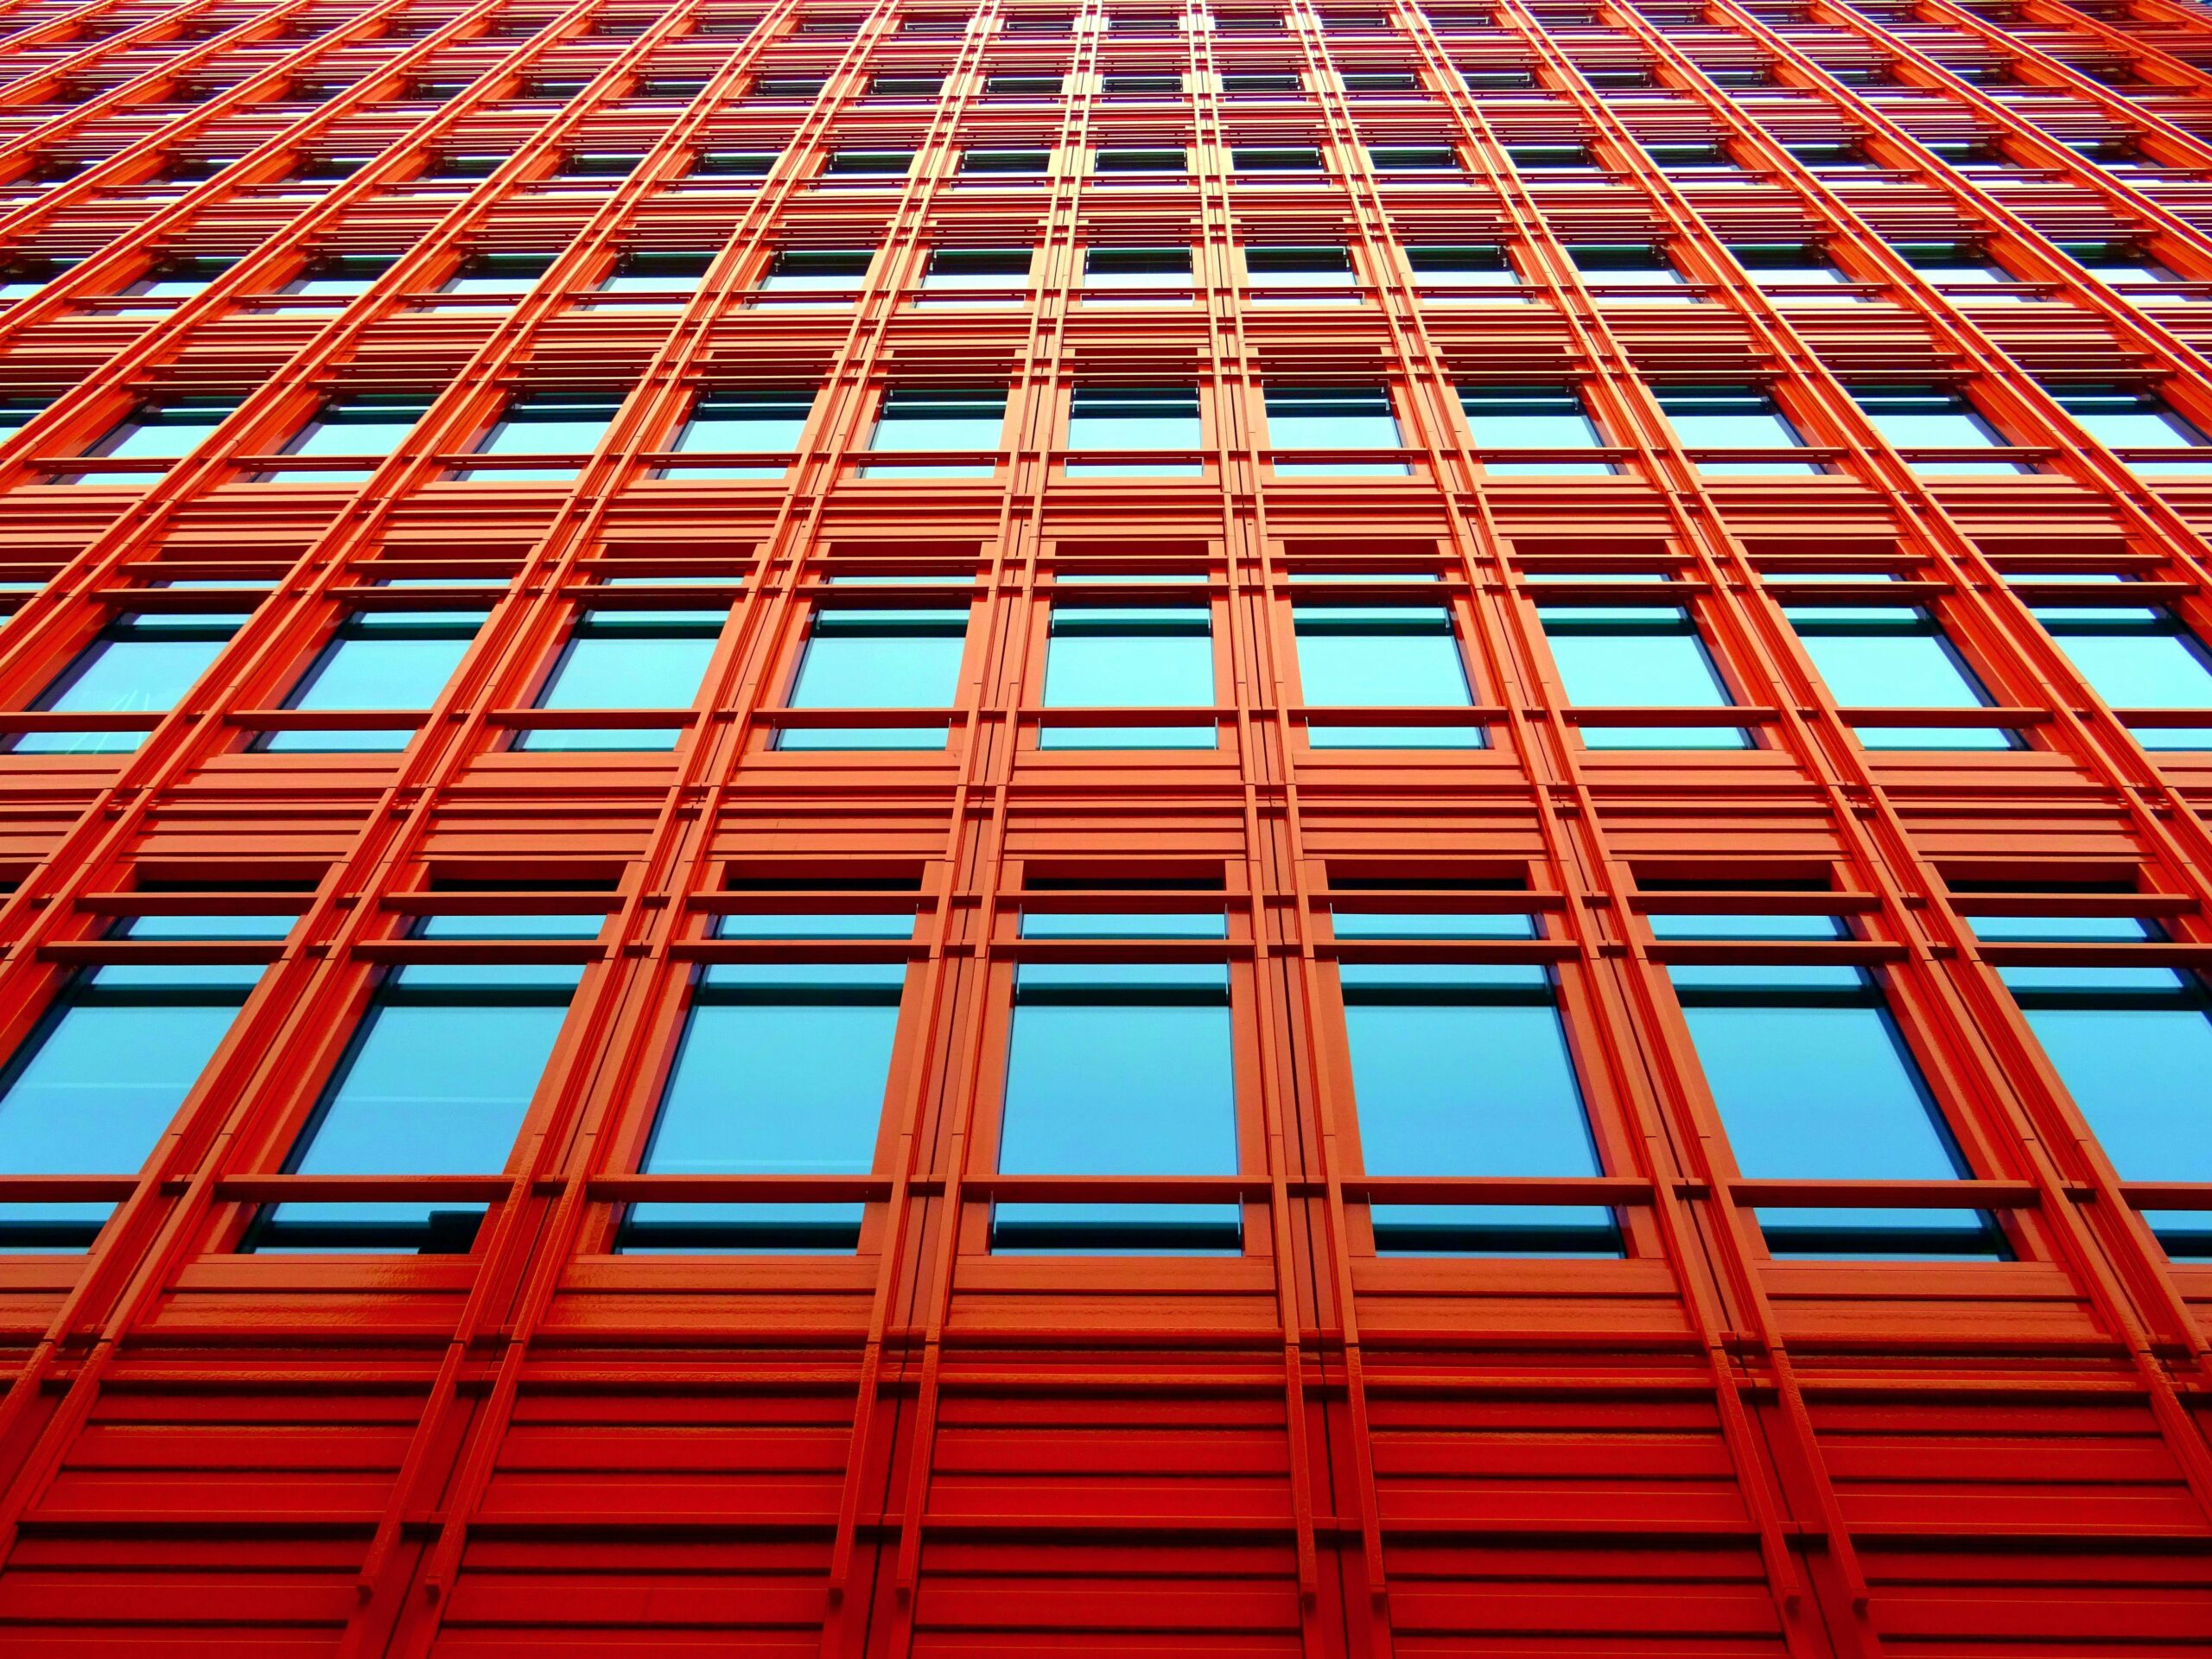 View looking up at a tall red building with windows